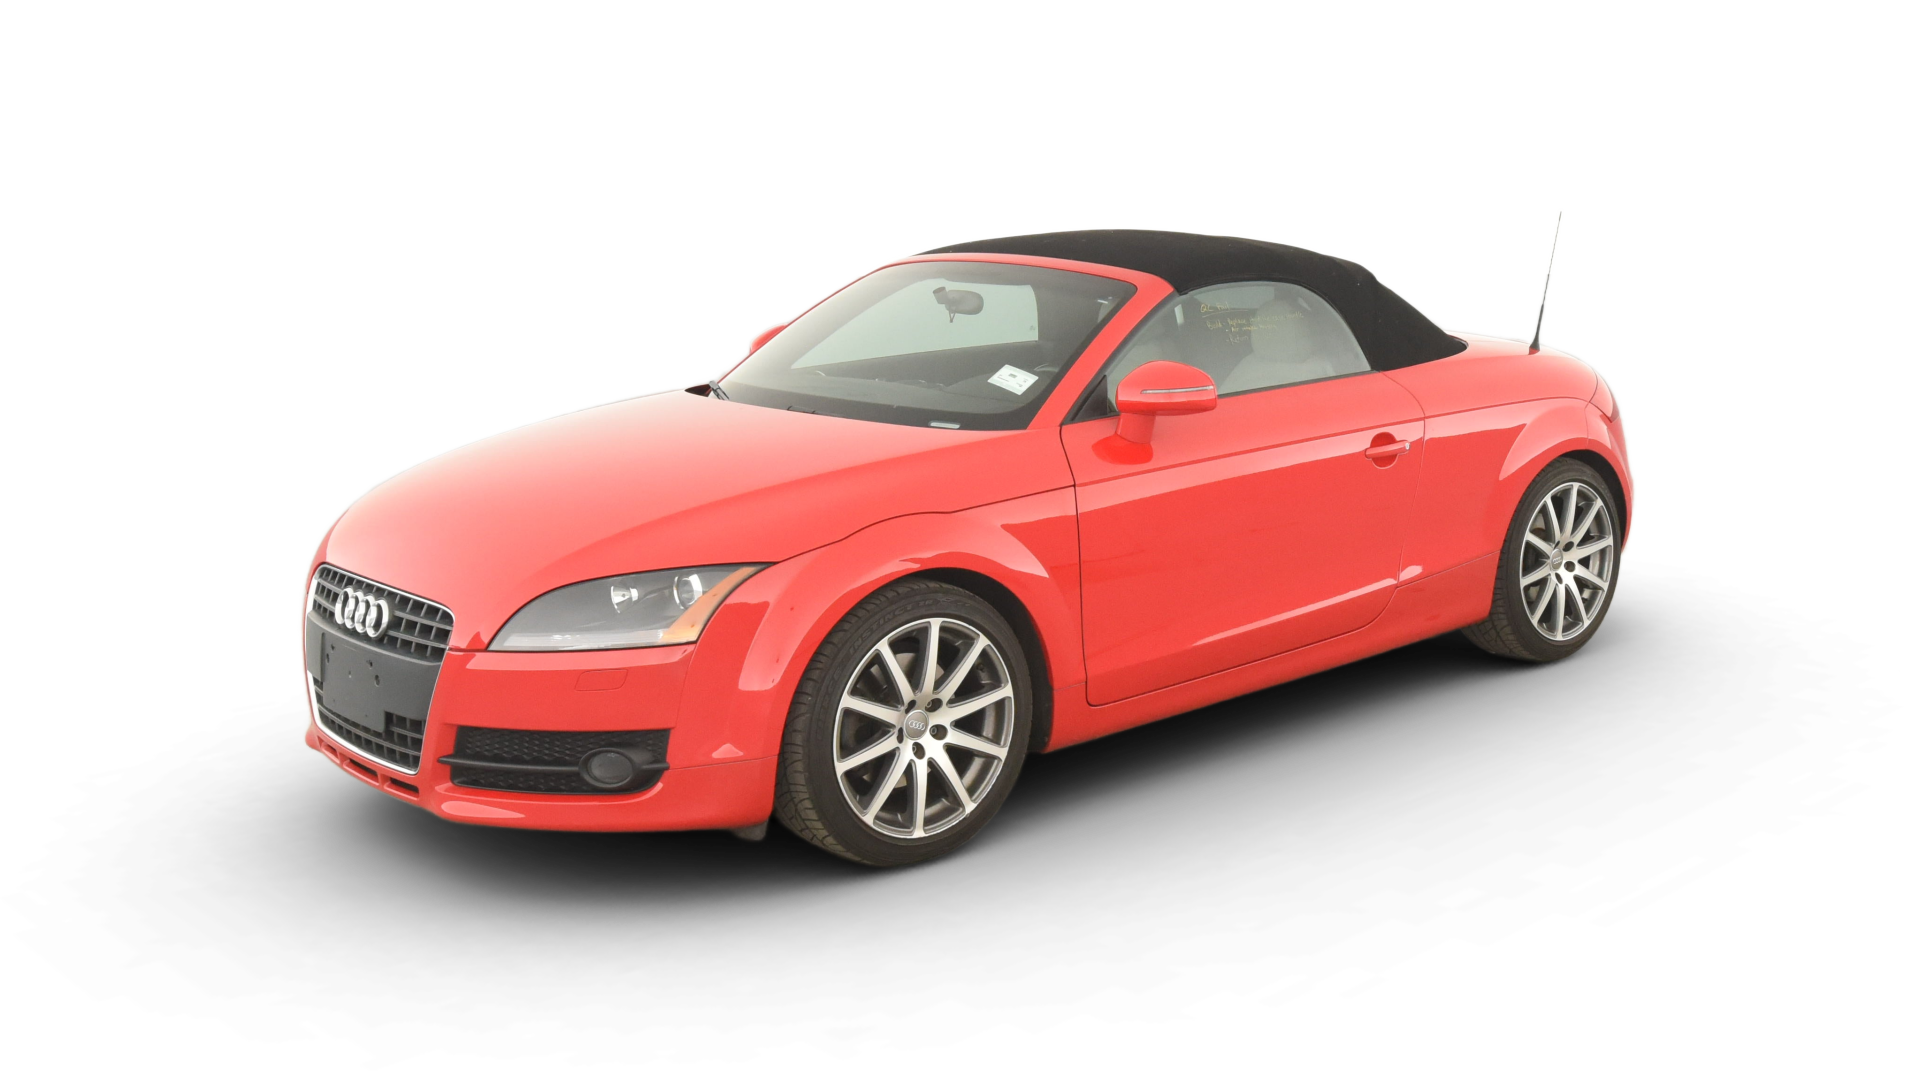 Used Red Audi For Sale Online | Carvana